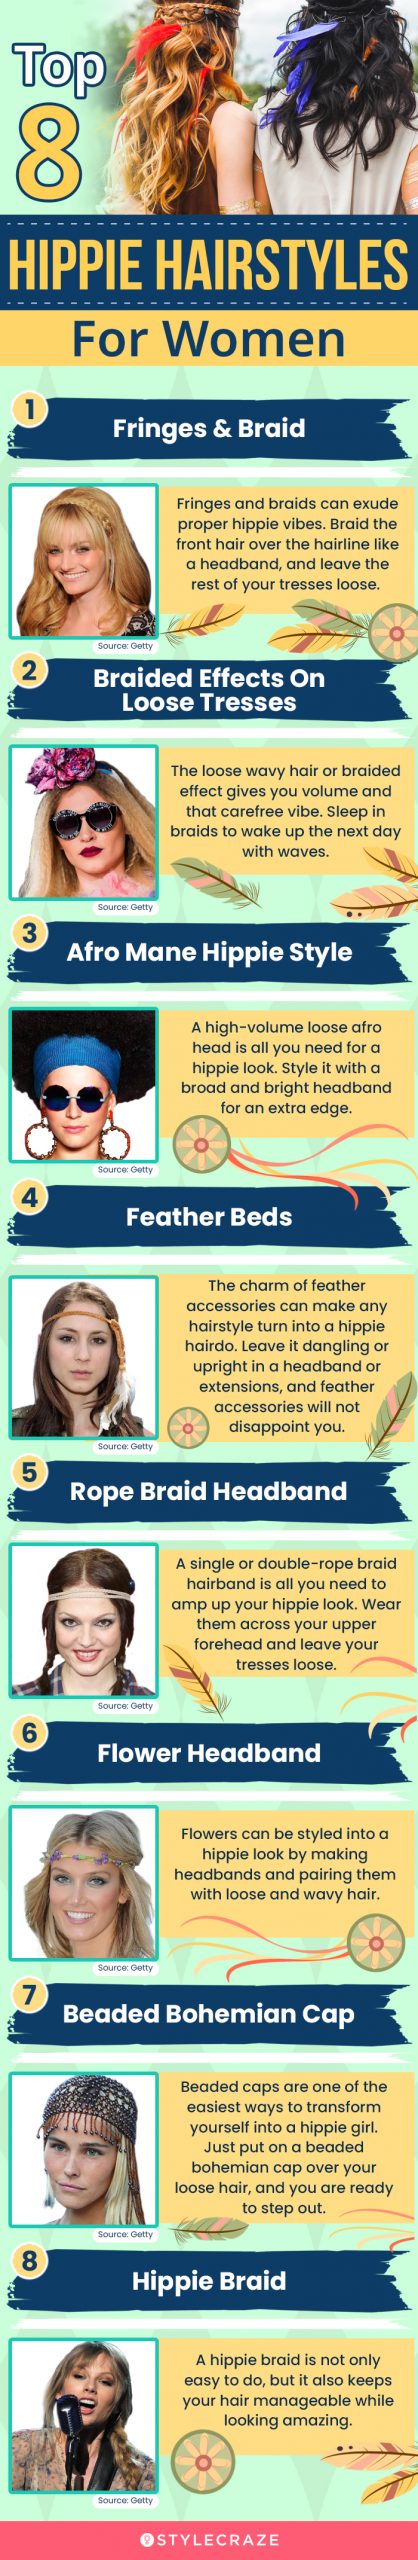 top 8 hippie hairstyles for women (infographic)